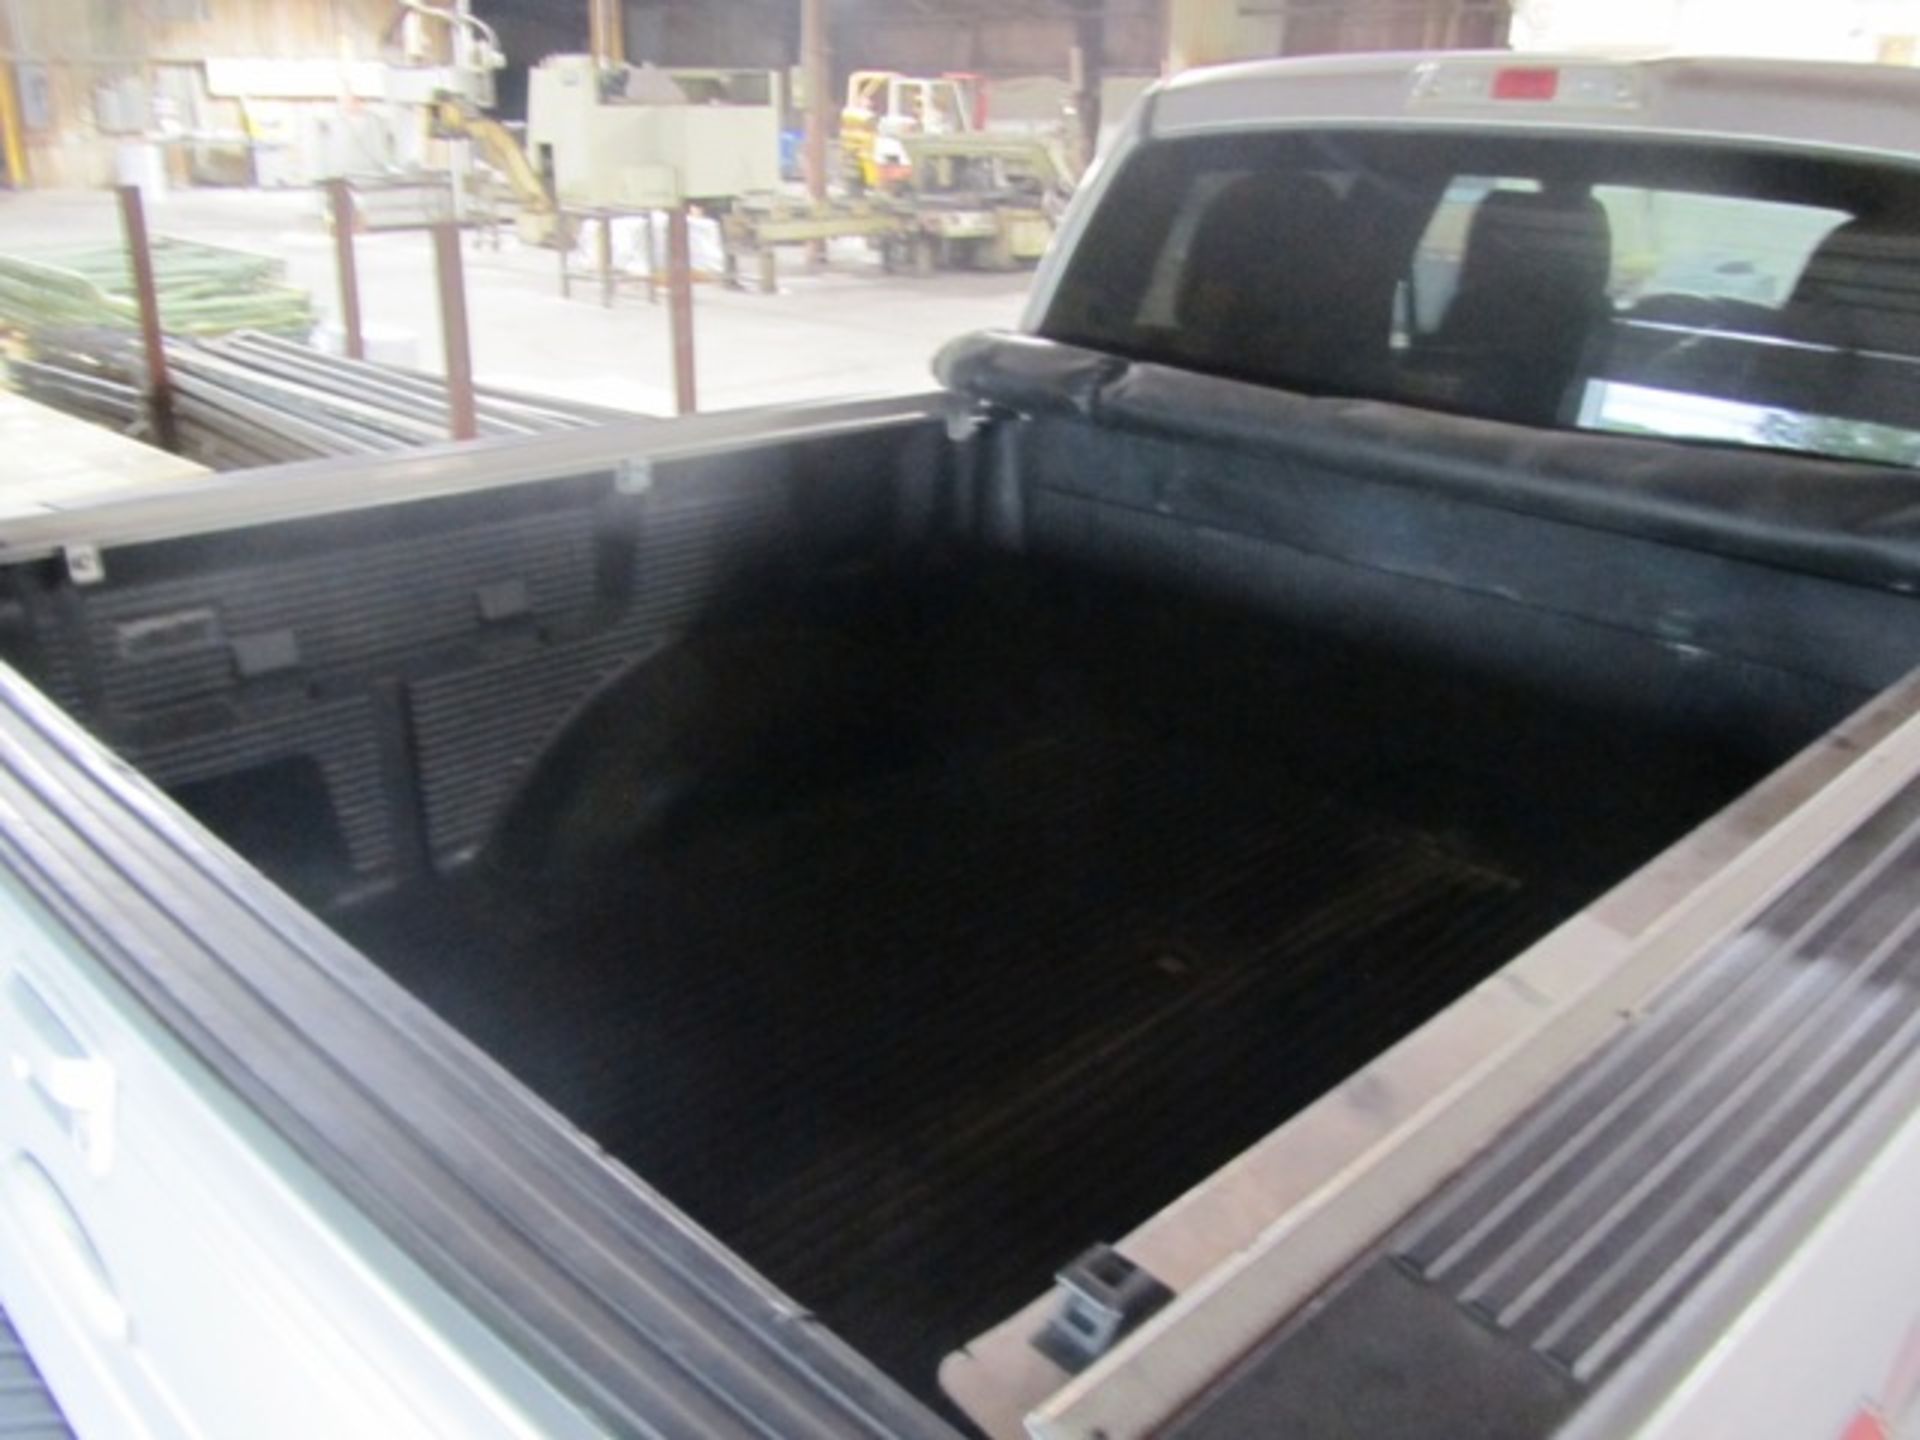 Ford F150 FX4 Crew Cab Pick-Up Truck with Short Bed, Running Boards, Automatic Transmission, 5.4 - Image 4 of 6